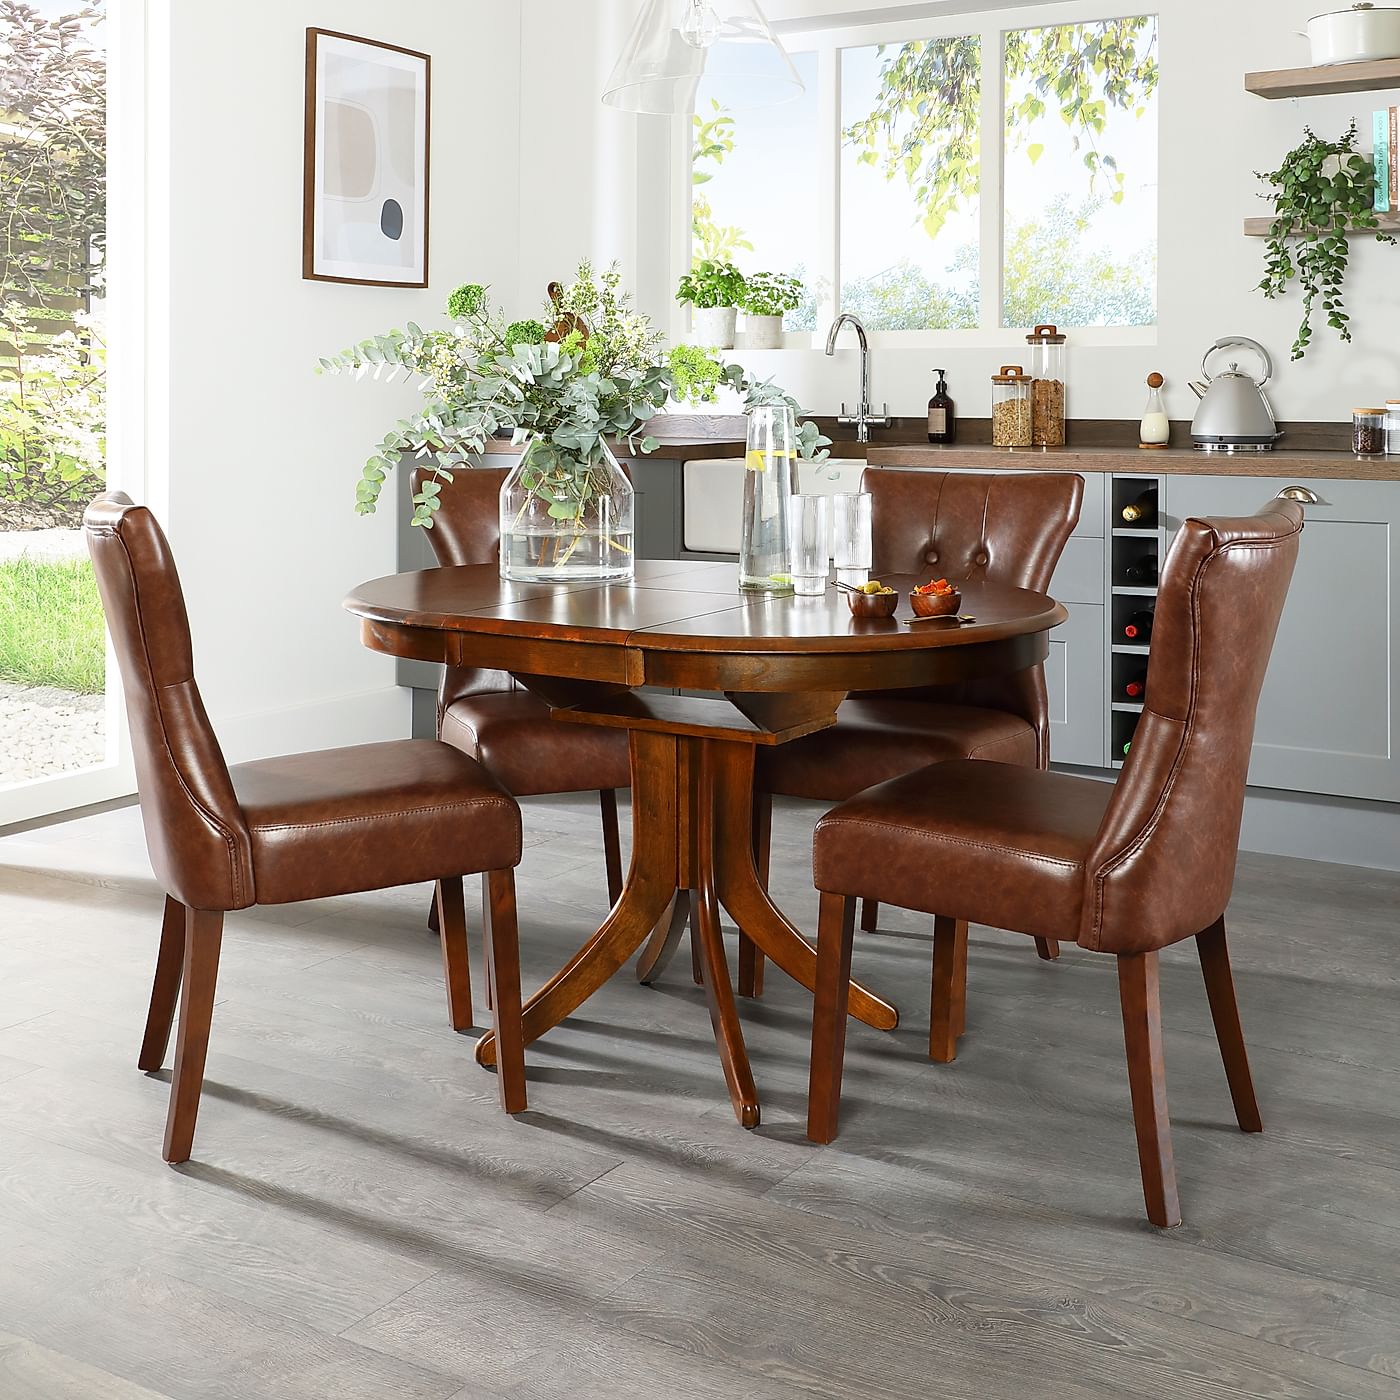 Dark Wood Dining Table Chairs - Dining Table Dark Wood Chairs Oval ...